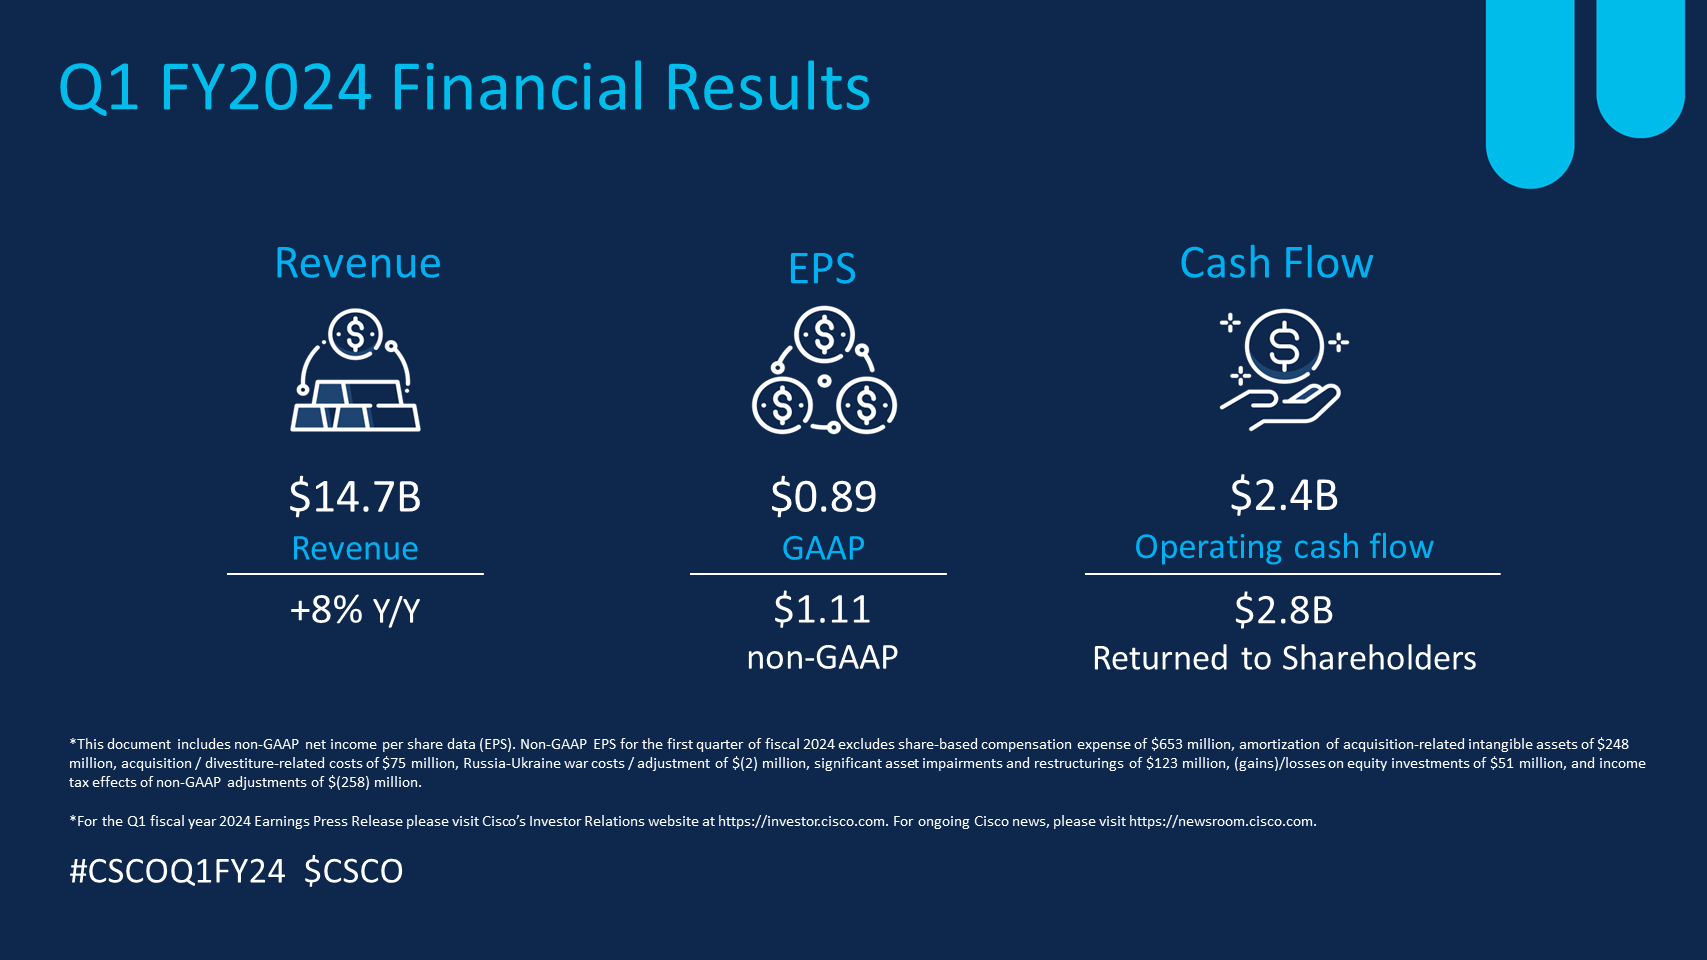 Cisco Q1 FY2024 Financial Results Infographic